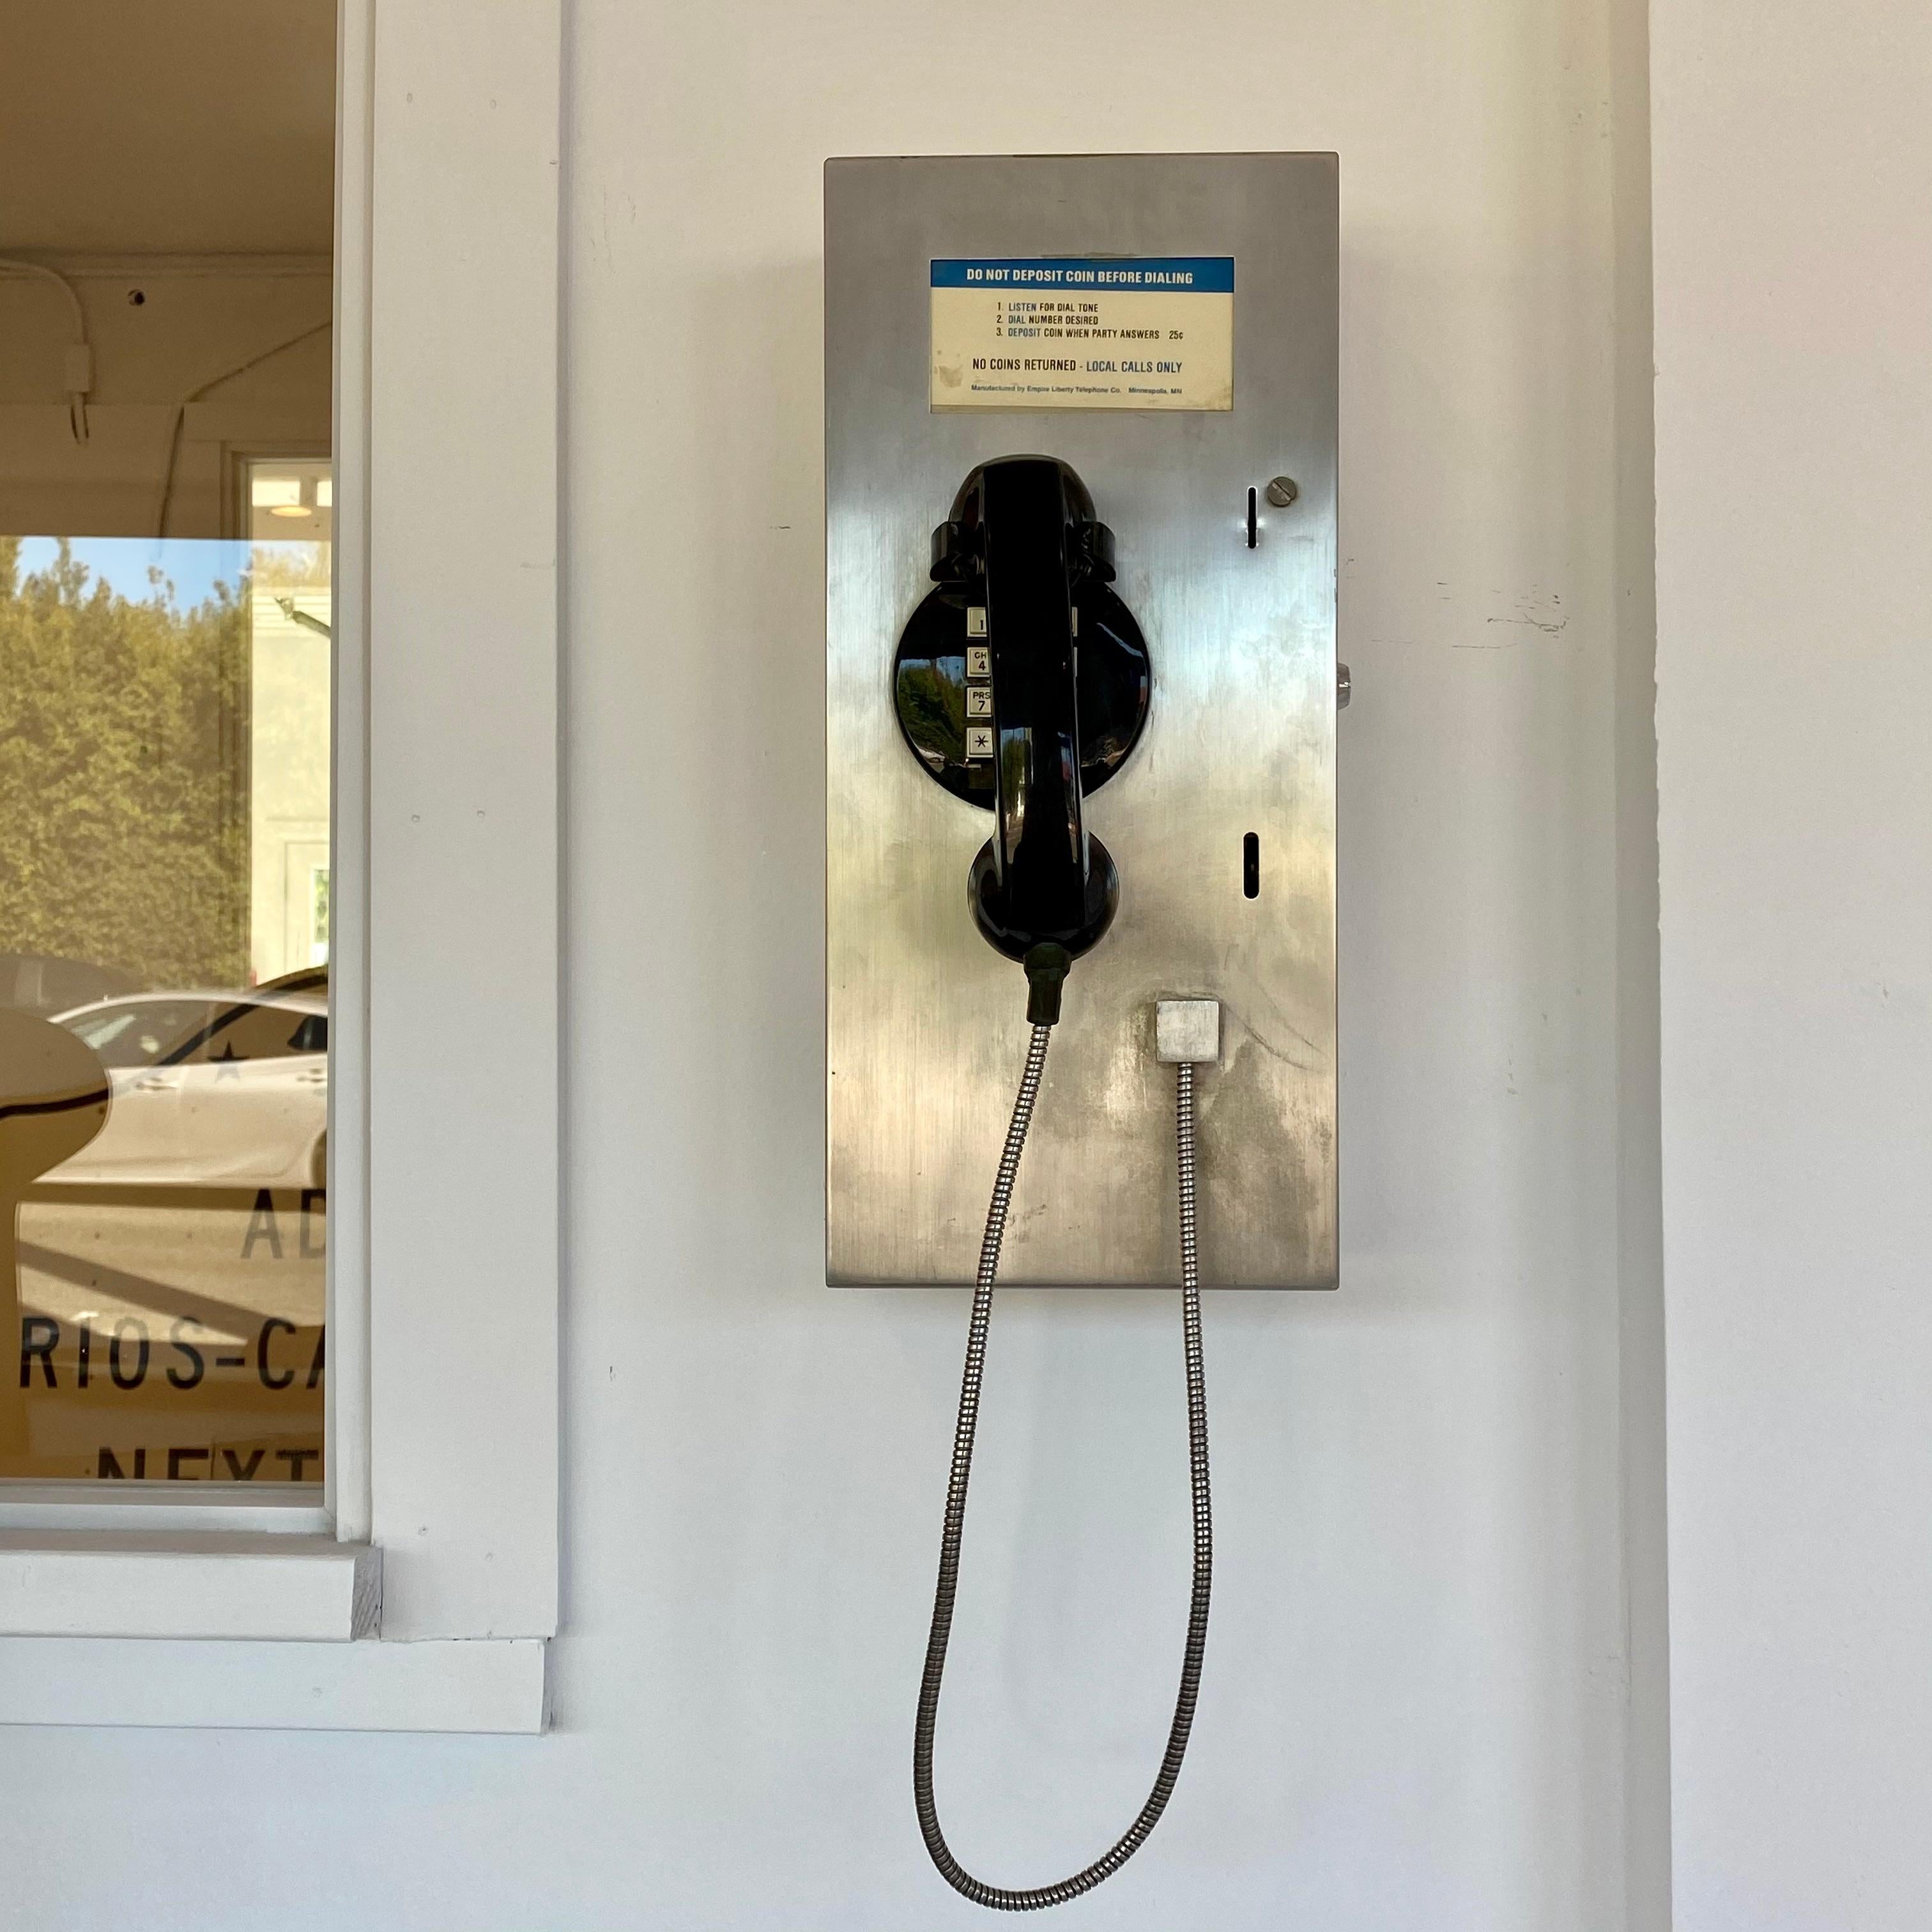 Unique vintage silver 1980s pay phone from Minneapolis, MN. Includes key that unlocks inside compartment. Great piece of wall decor or hidden stash box. Good vintage condition. Working phone!